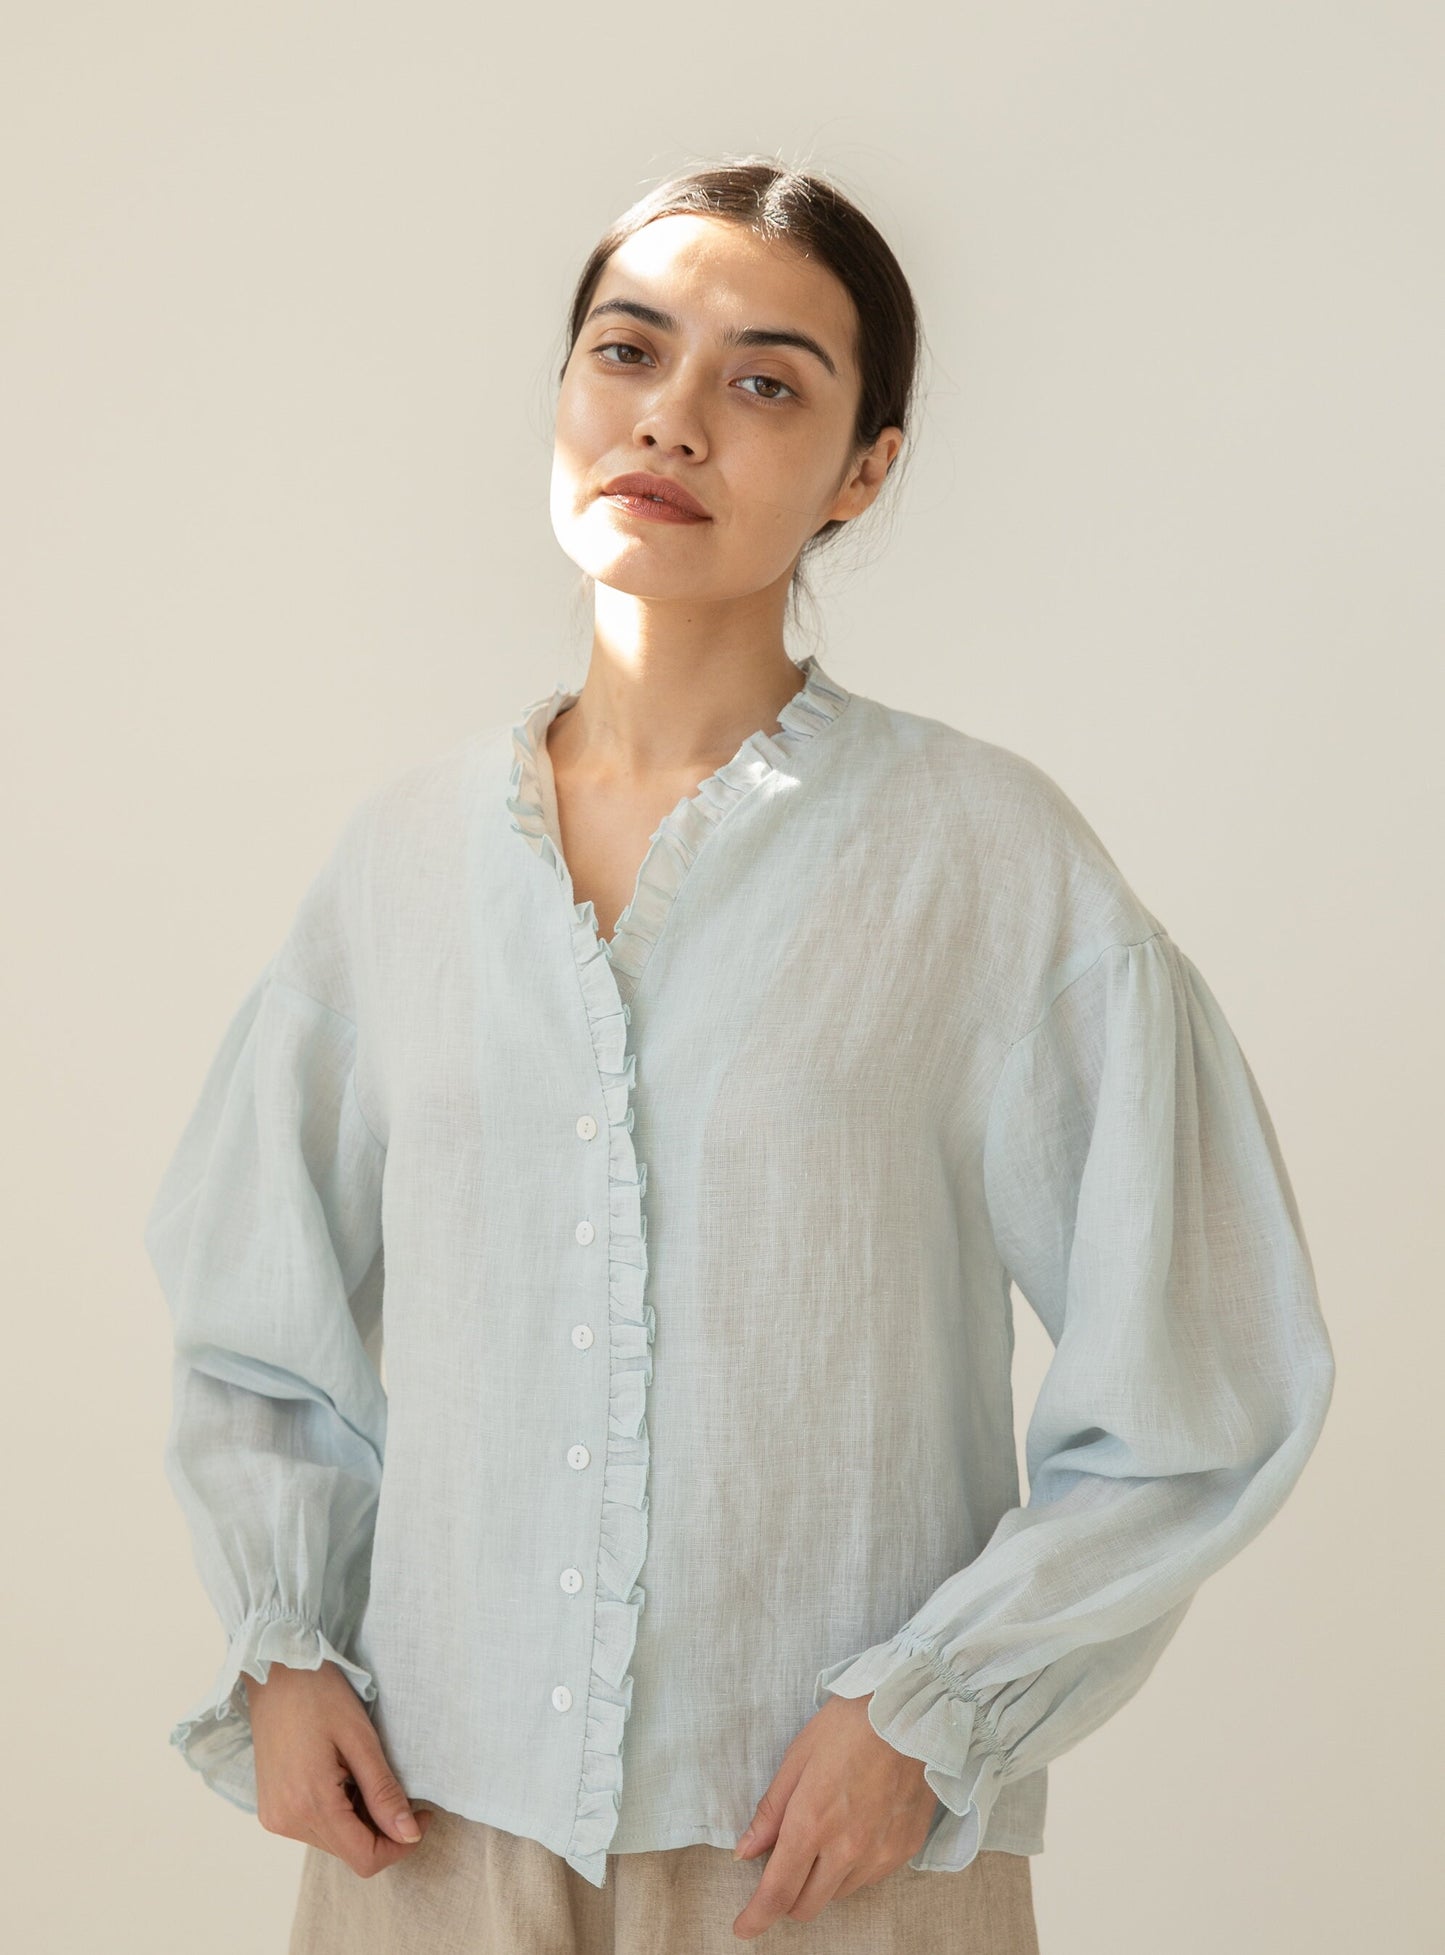 Breathable Linen Blouse with delicate ruffle placket detail.